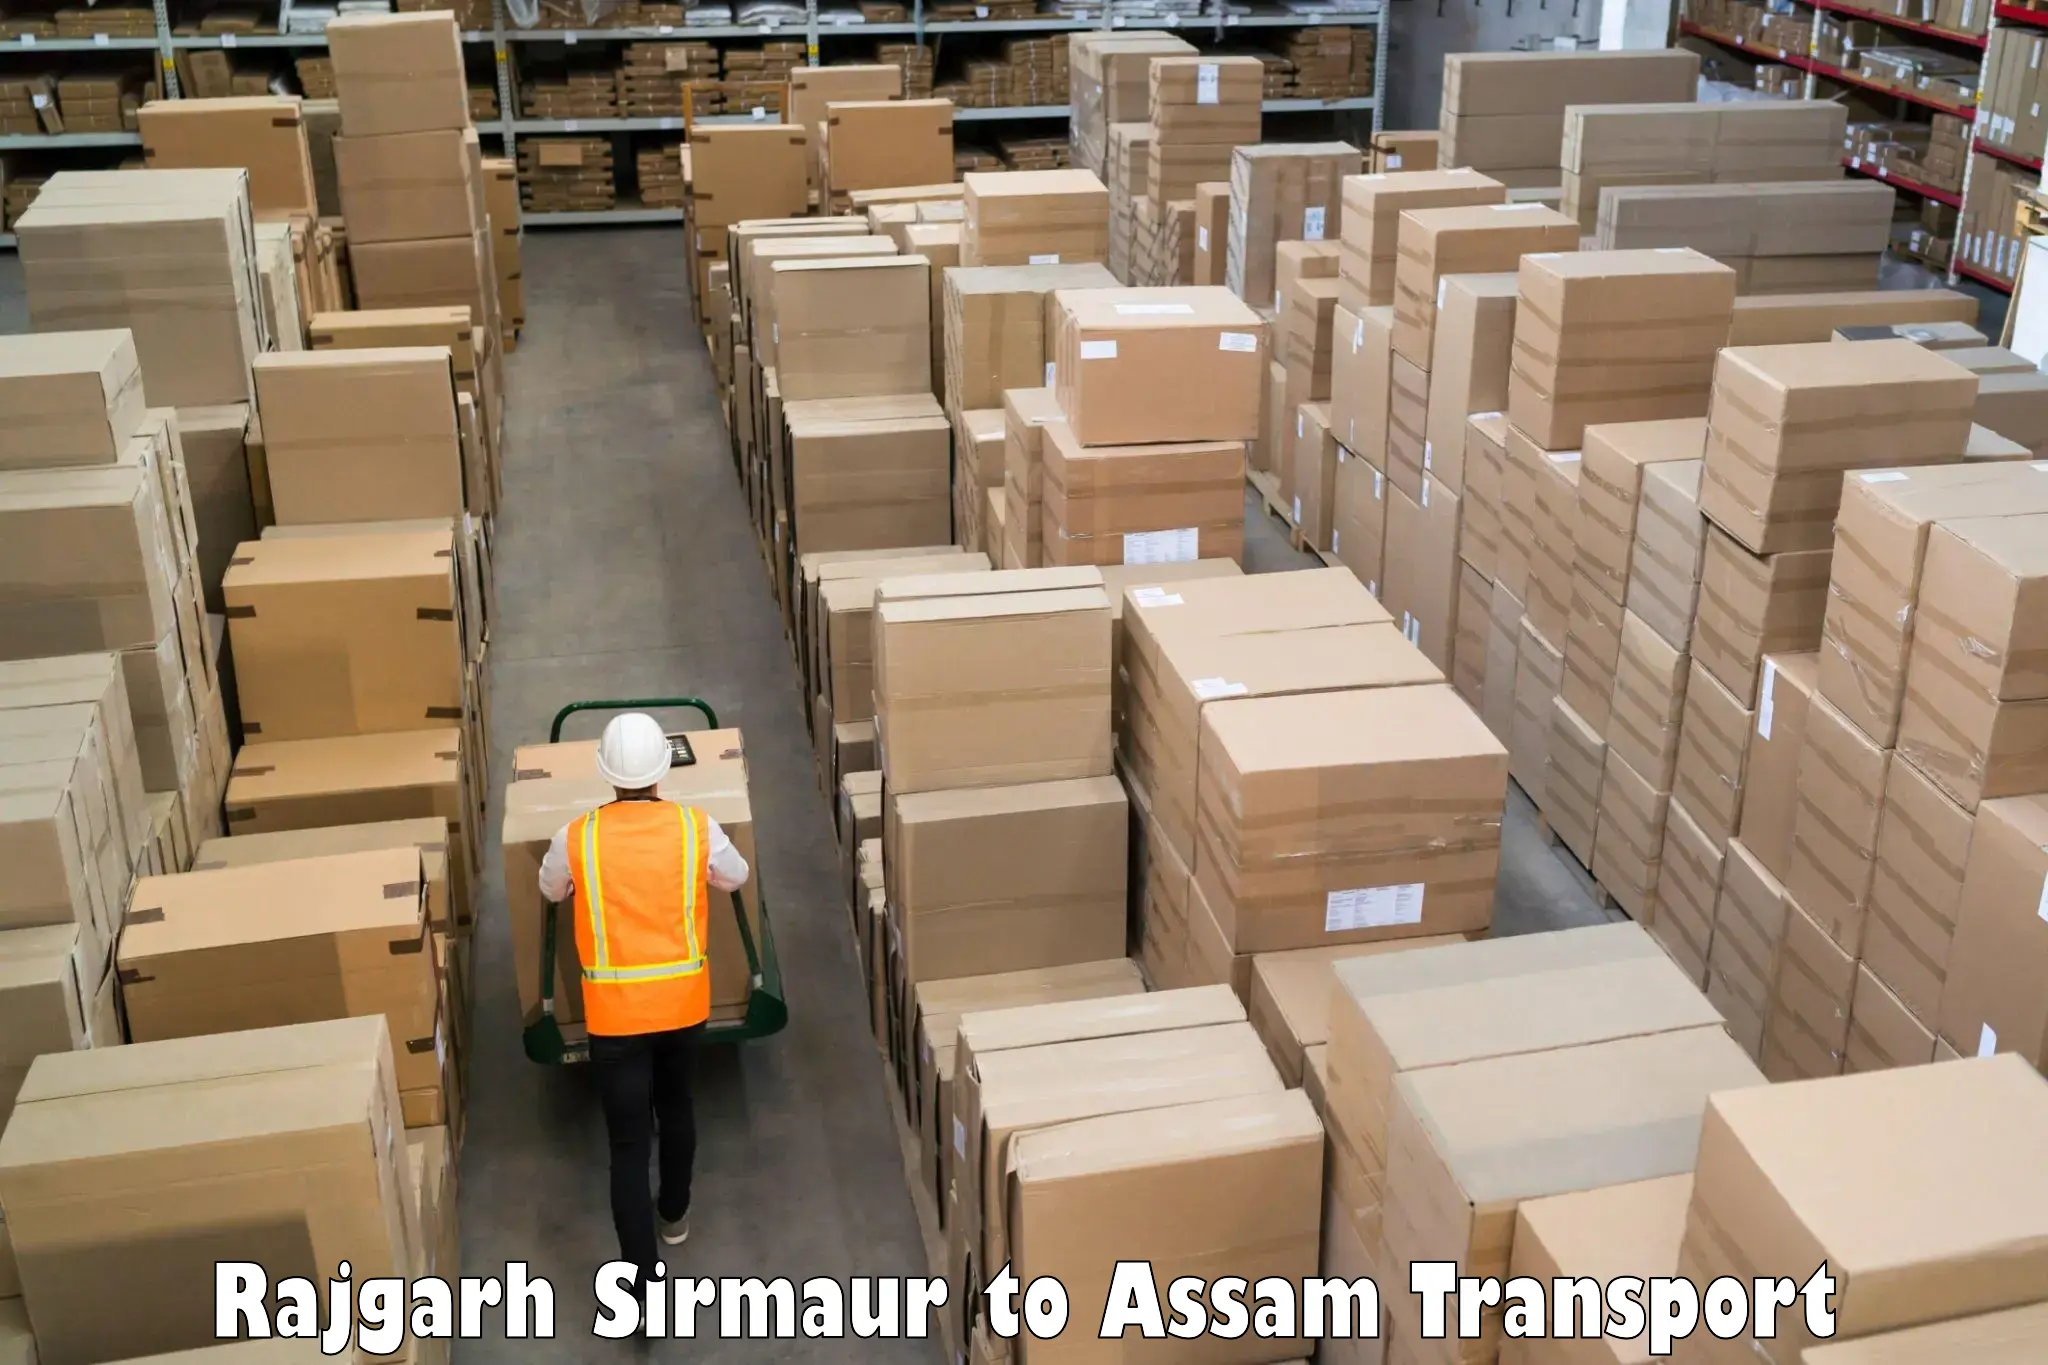 Part load transport service in India Rajgarh Sirmaur to Assam